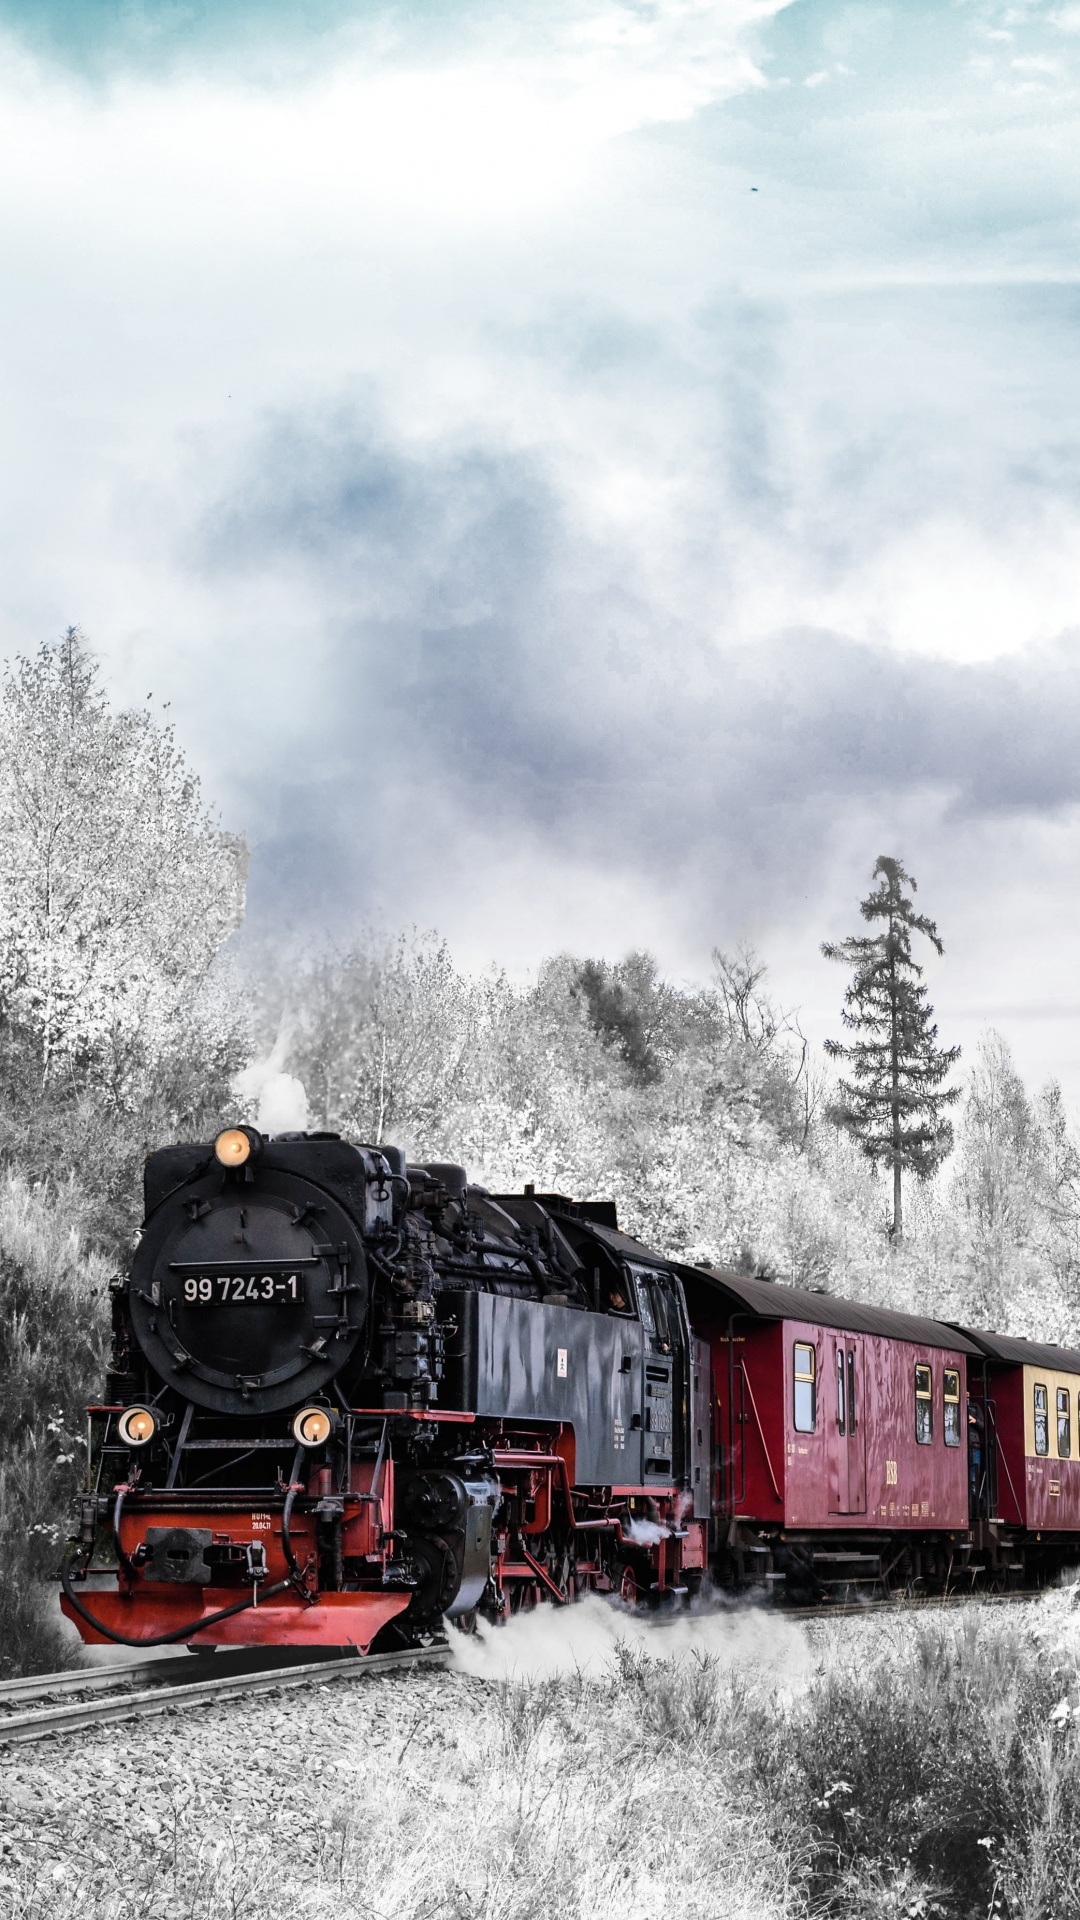 Red and Black Train on Rail Tracks Under Cloudy Sky. Wallpaper in 1080x1920 Resolution